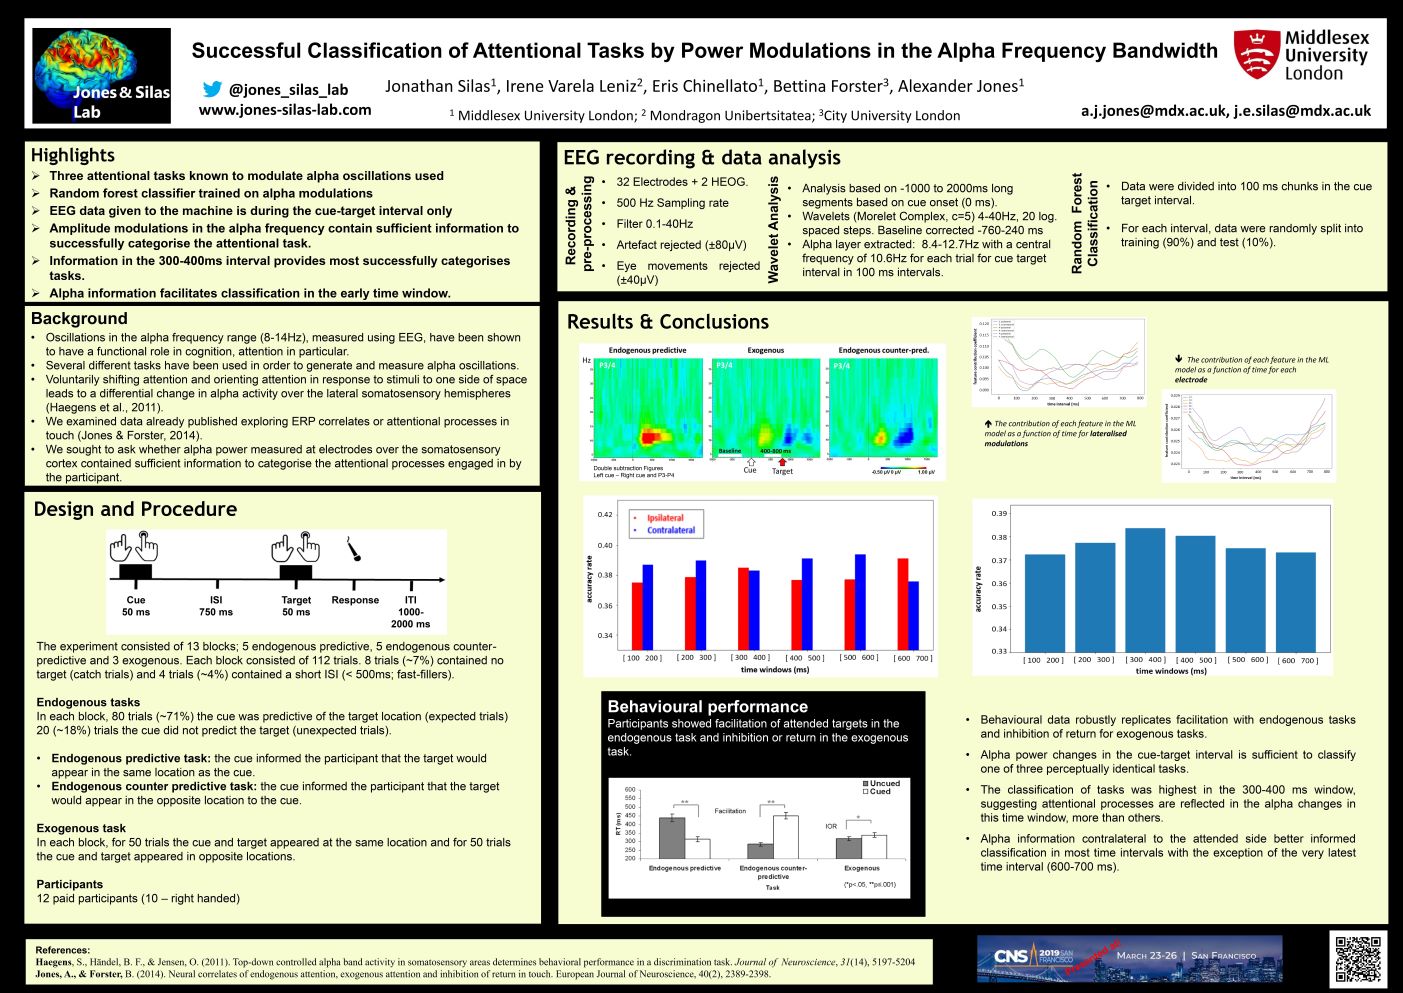 Successful Classification of Attentional Tasks by Power Modulations in the Alpha Frequency Bandwidth - CNS 2019